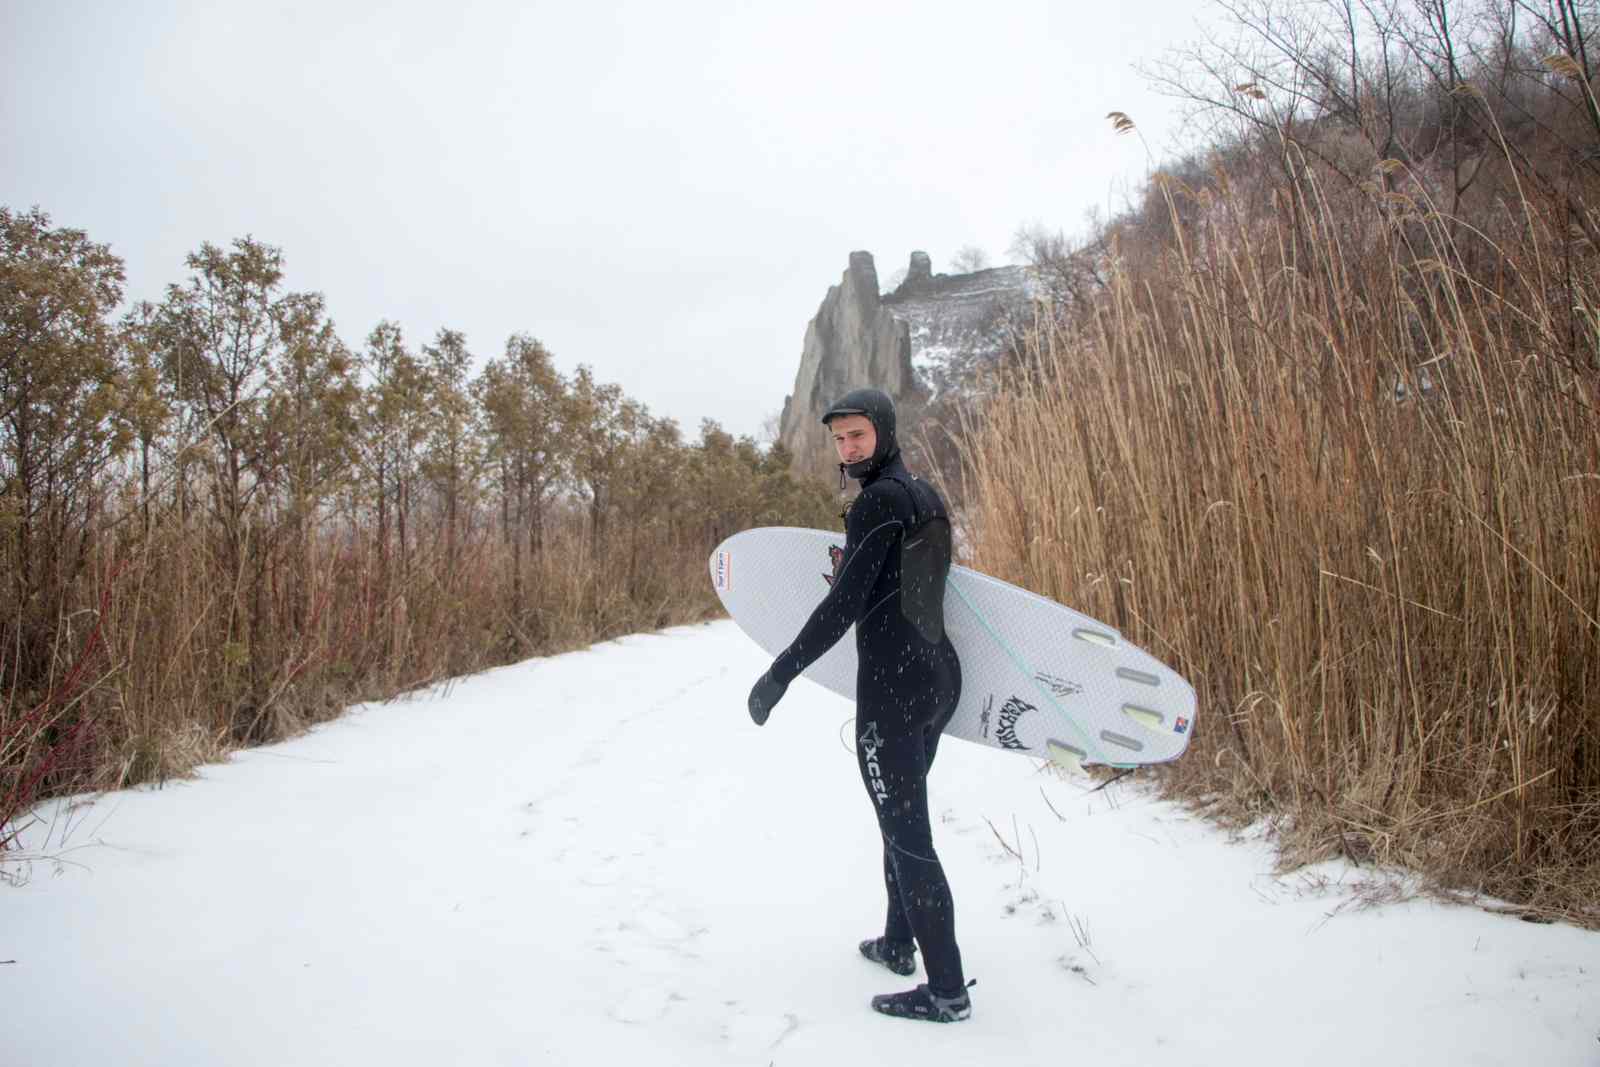 Man in a wetsuit carries a surfboard down a snowy path.